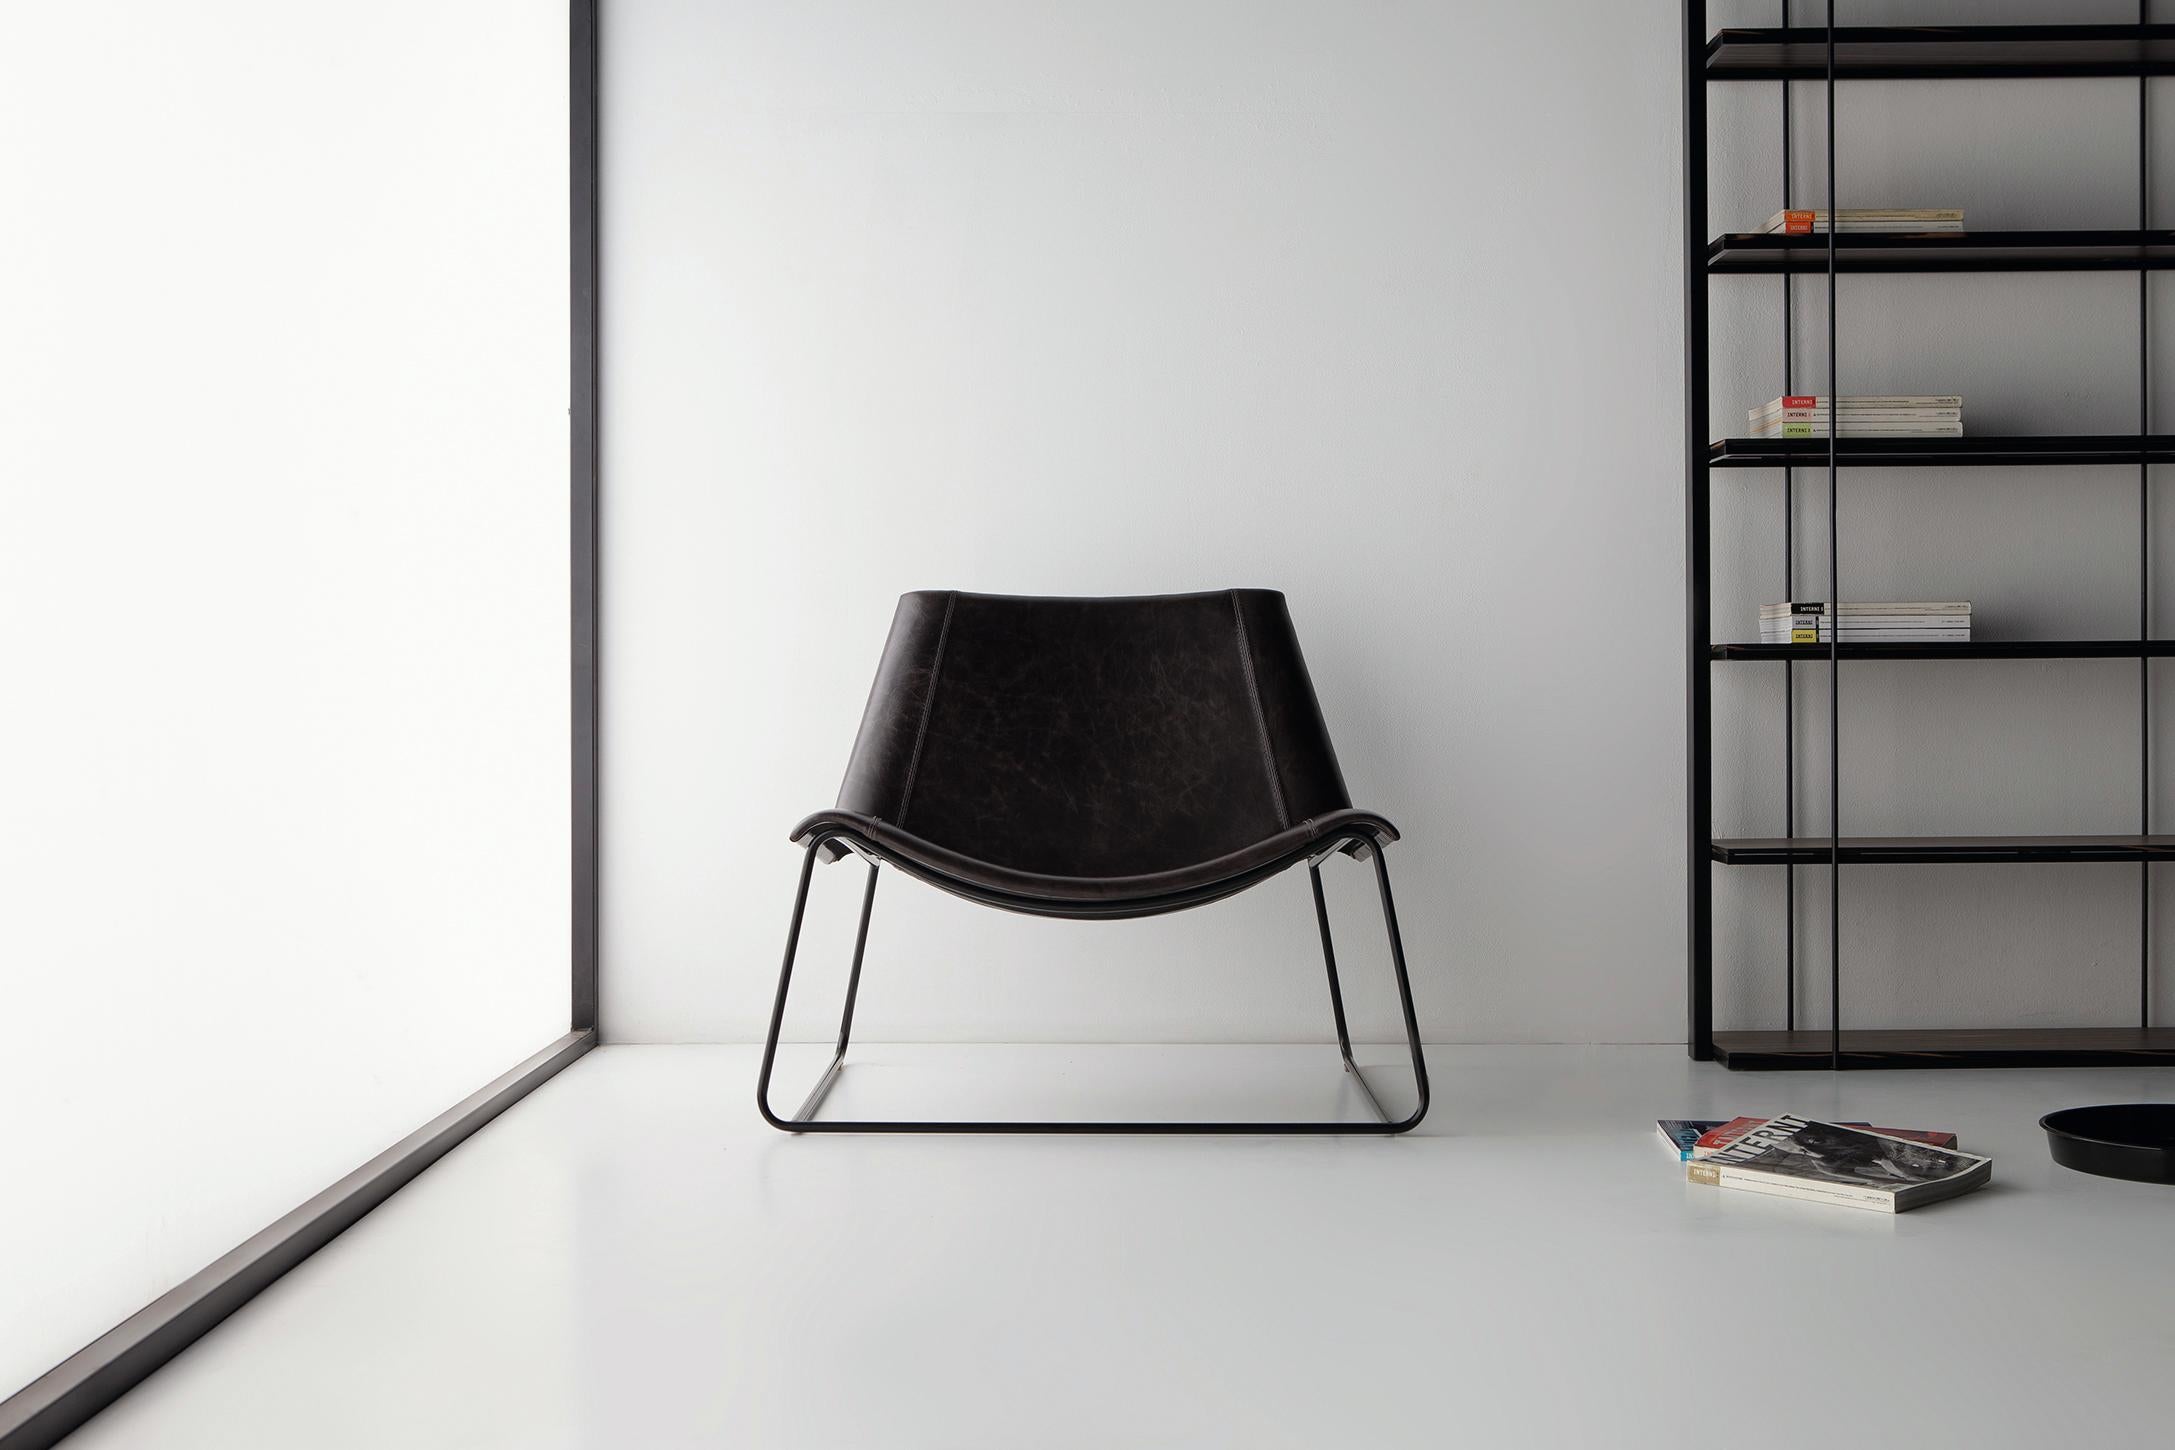 Evo Lounge Chair by Doimo Brasil
Dimensions: W 93 x D 74 x H 76 cm 
Materials: Paint, Natural leather


With the intention of providing good taste and personality, Doimo deciphers trends and follows the evolution of man and his space. To this end,